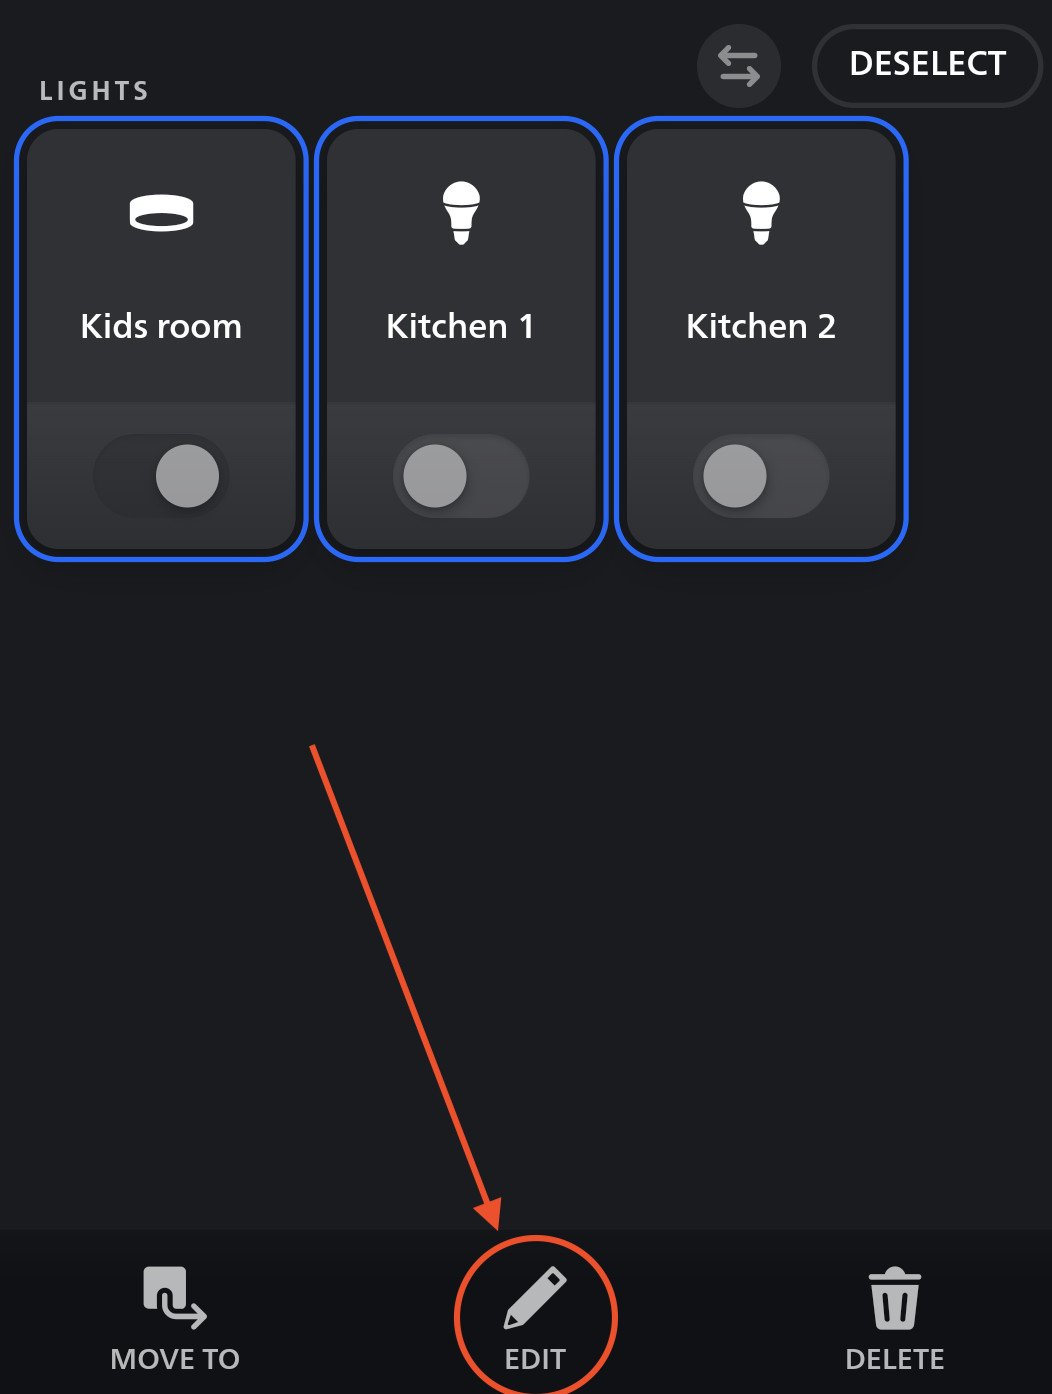 The Philips Hue app got a nice quality-of-life change.